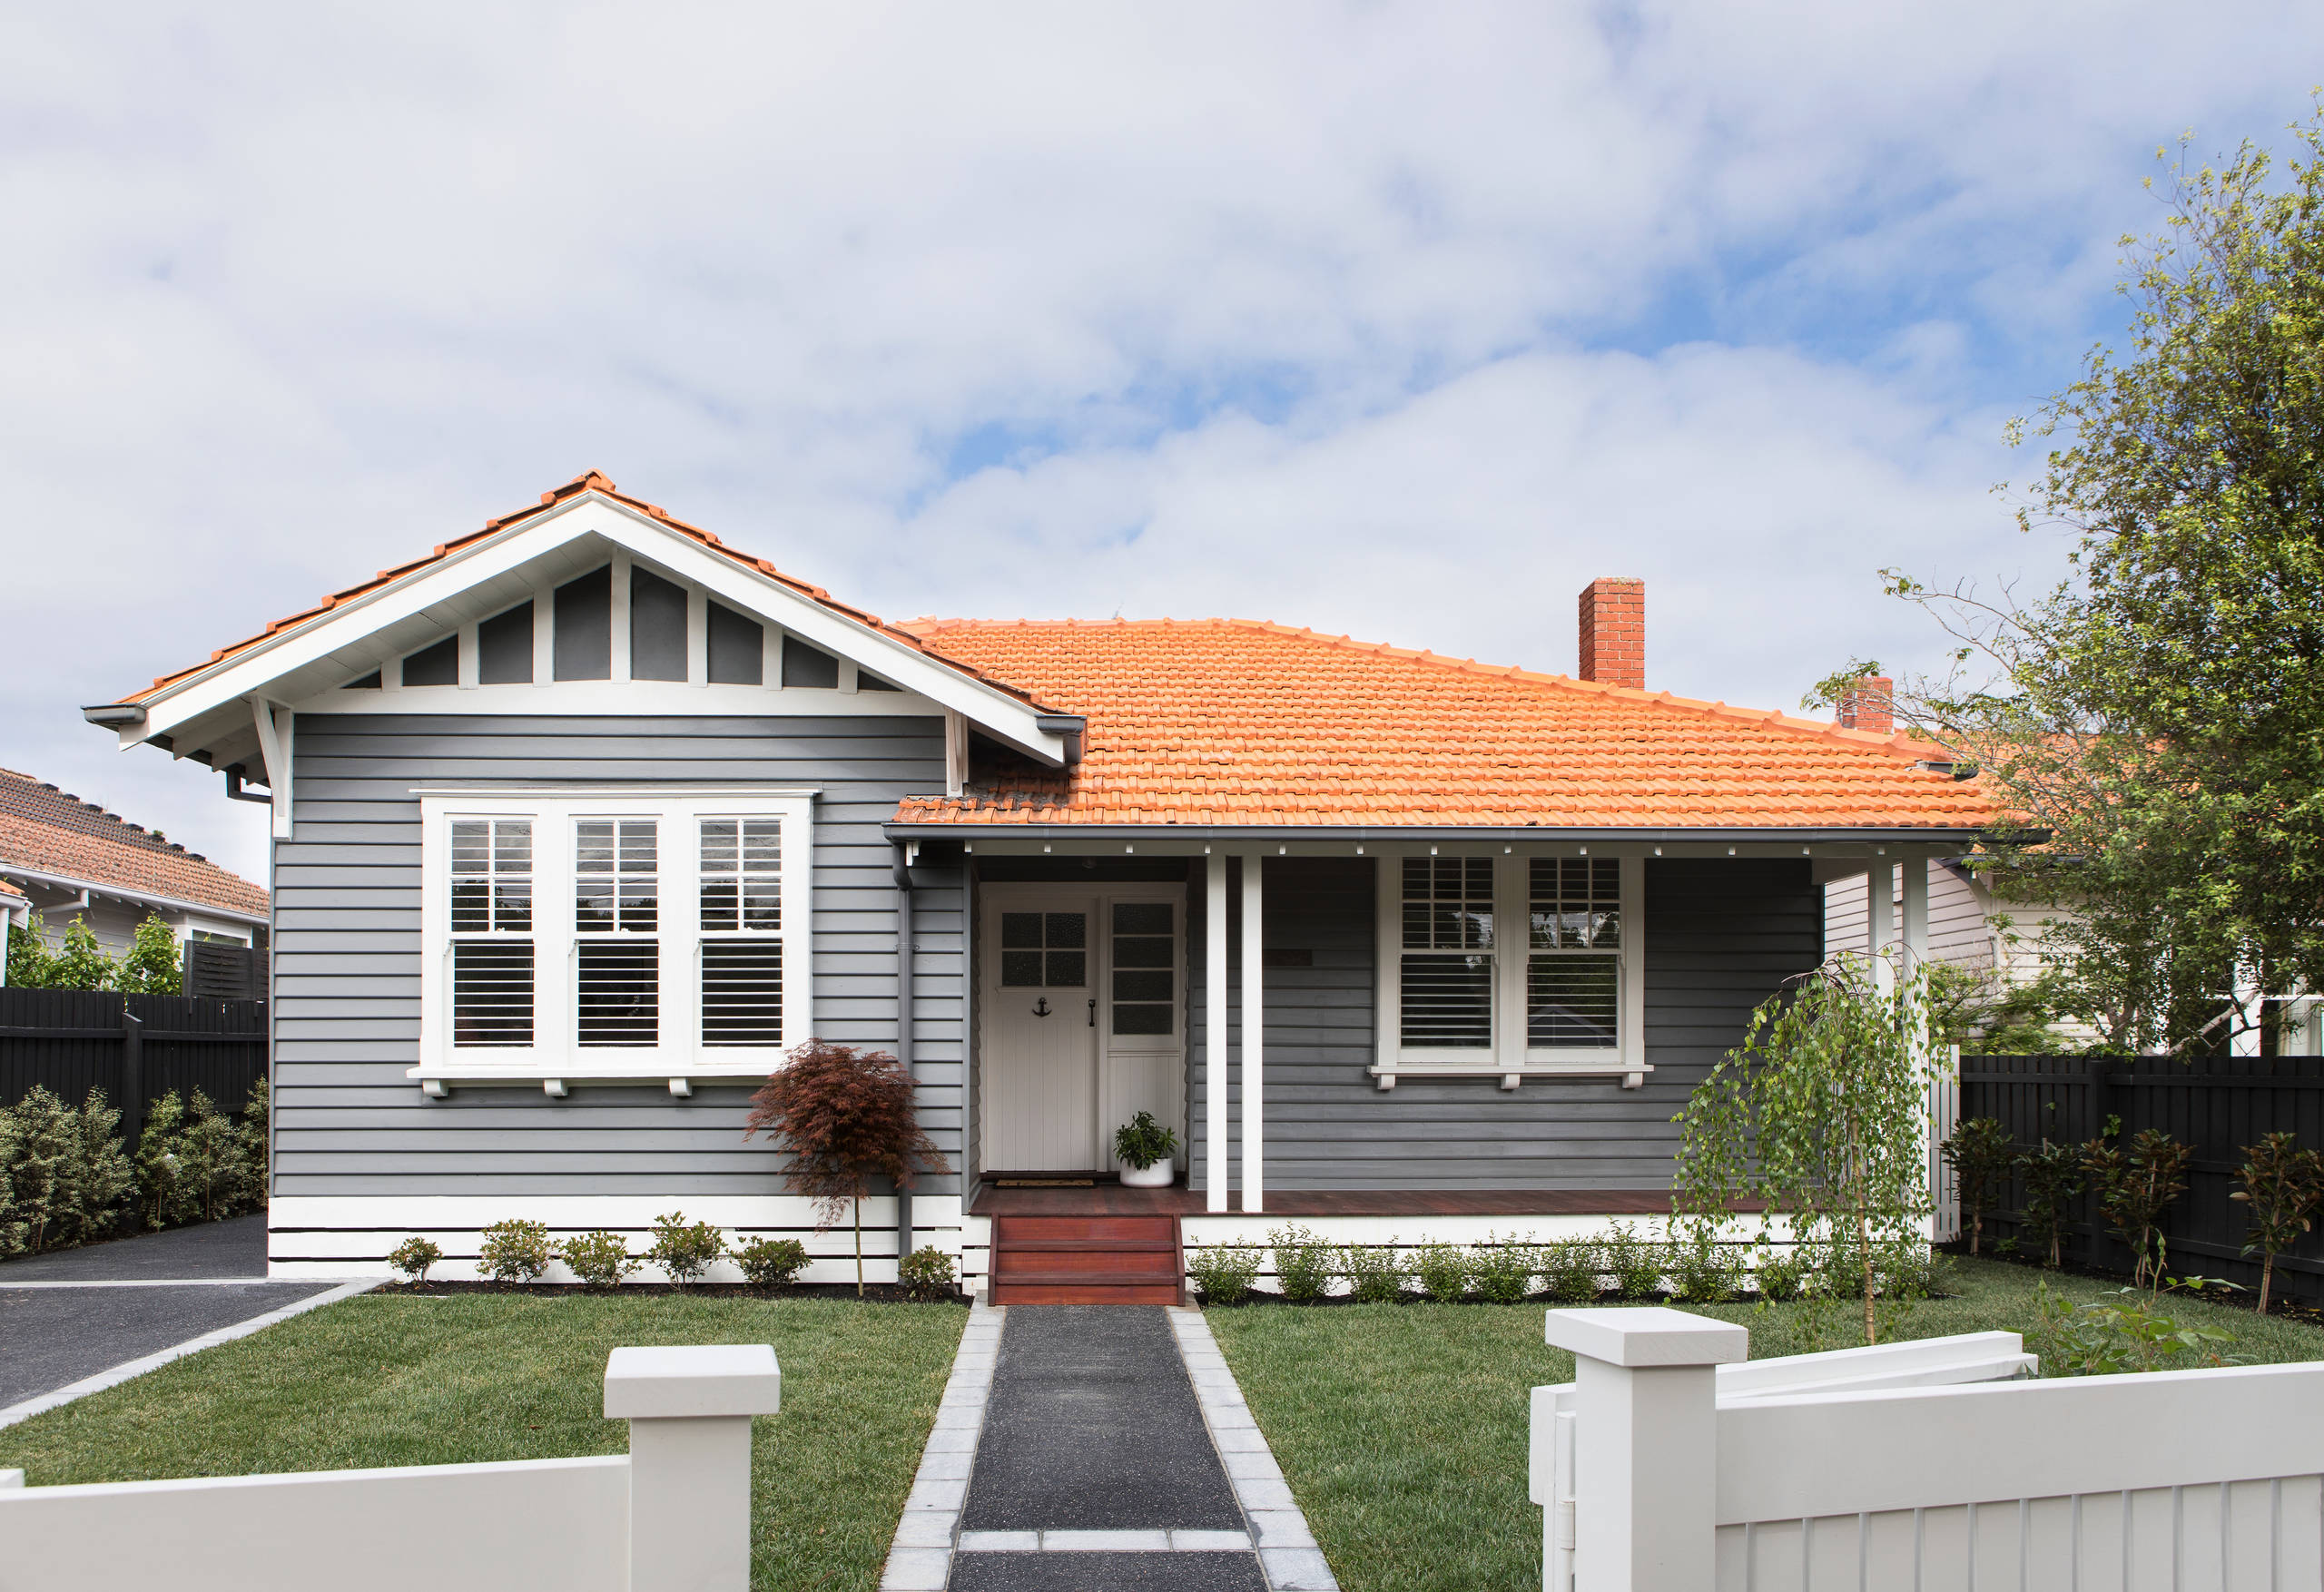 So You Live In A Weatherboard House